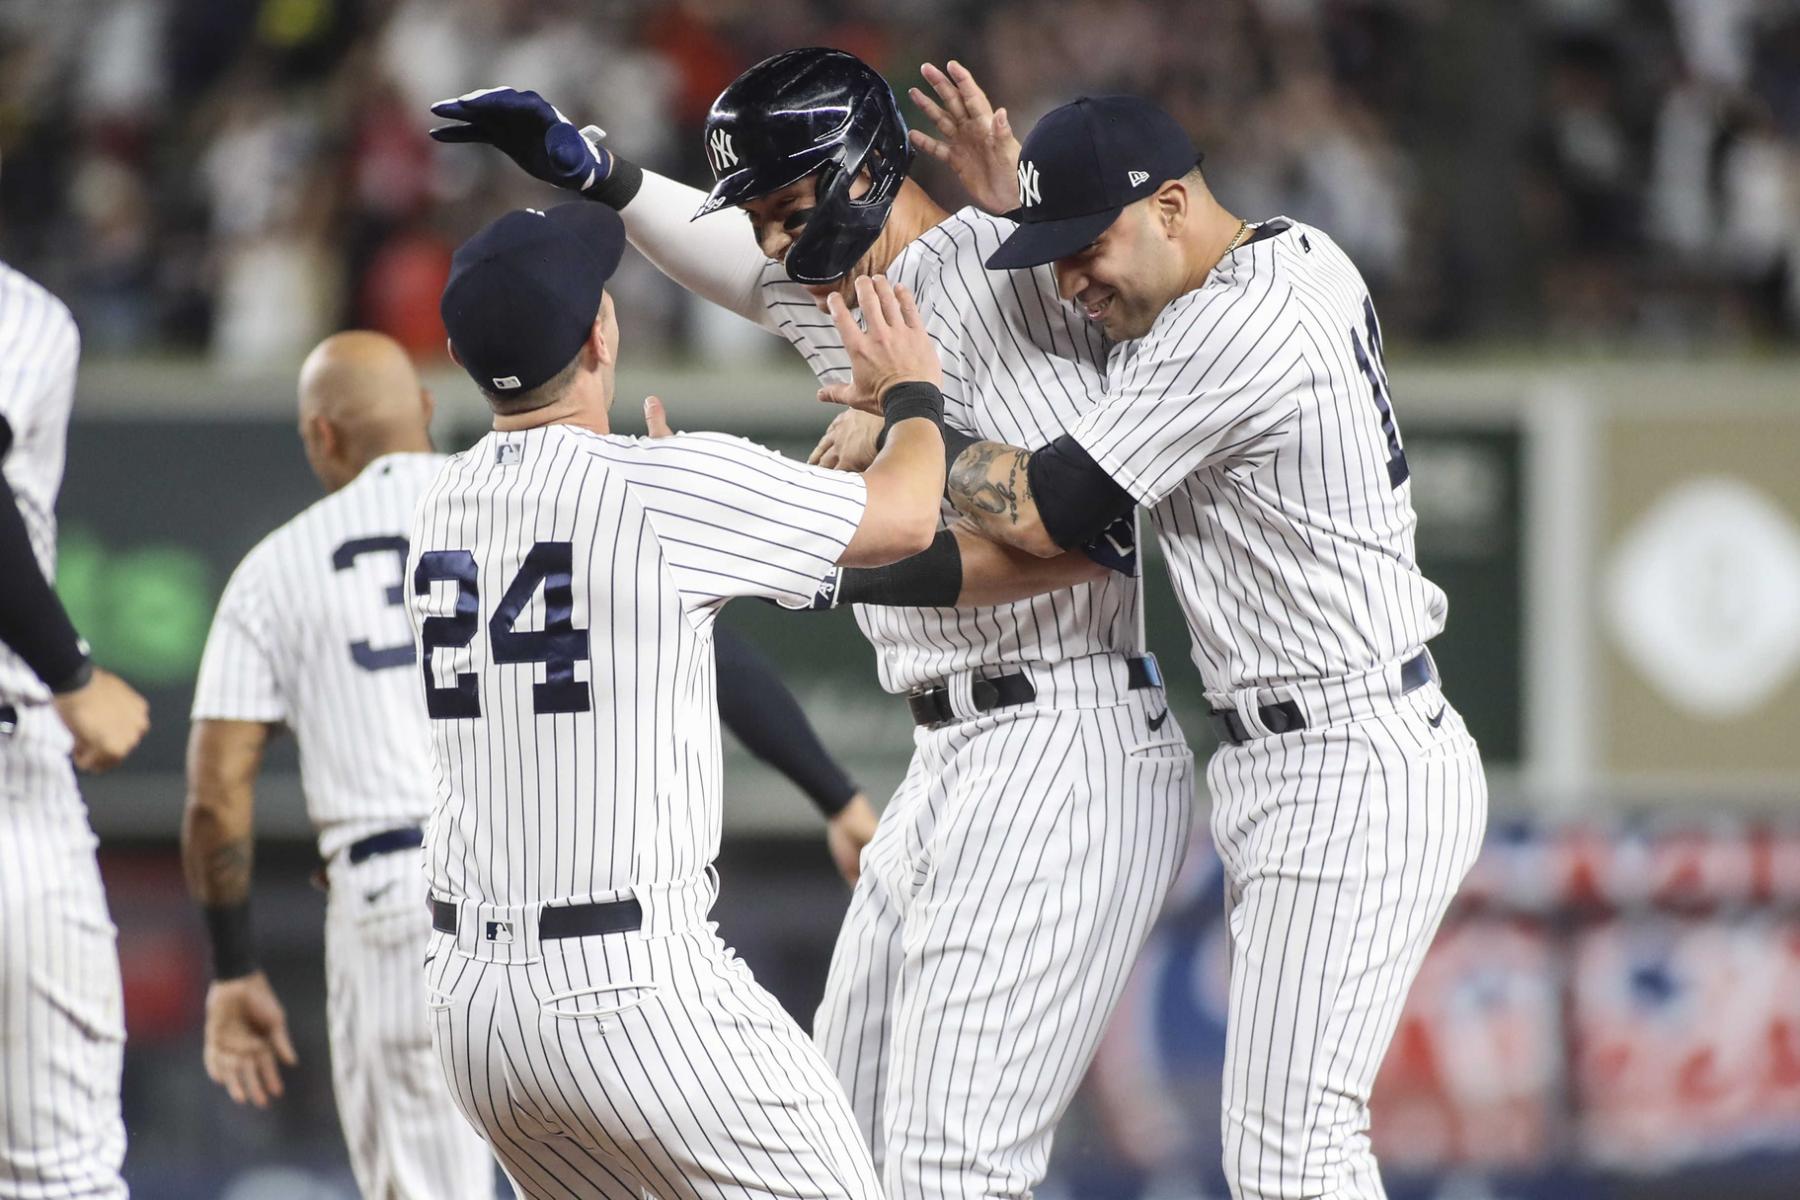 New York Yankees center fielder Aaron Judge (99) celebrates after hitting a game winning RBI single in the ninth inning to defeat the Houston Astros 7-6 at Yankee Stadium. Mandatory Credit: Wendell Cruz-USA TODAY Sports